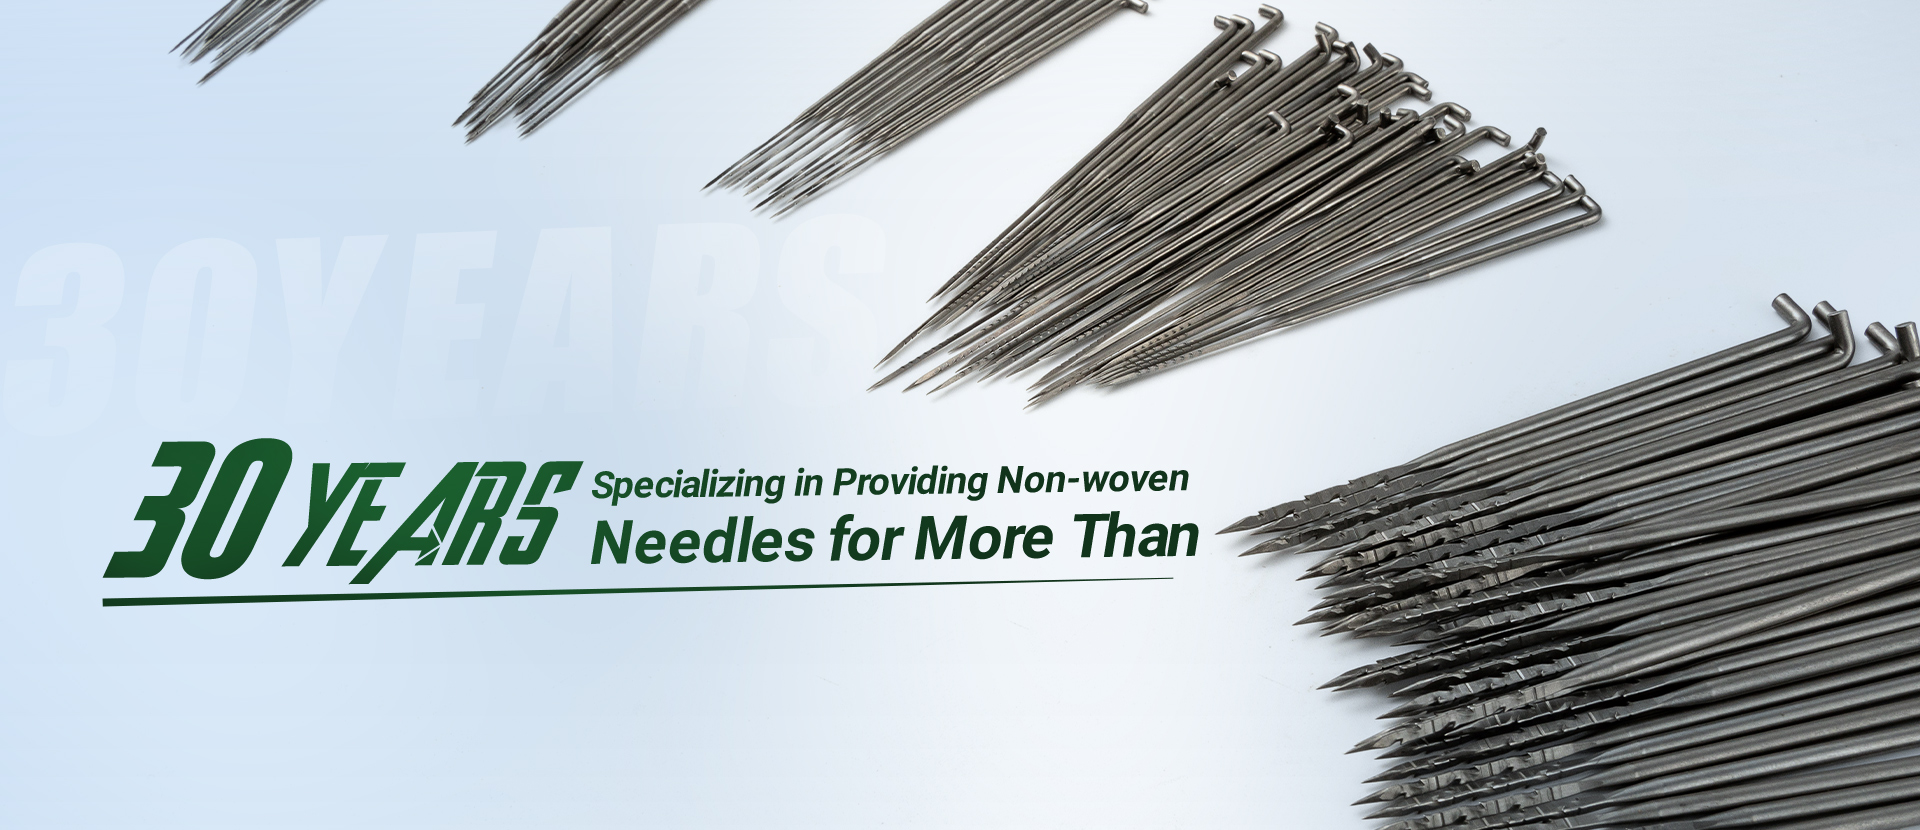 Star Needles, Crown Needle, Conical Needle - Chengxiang